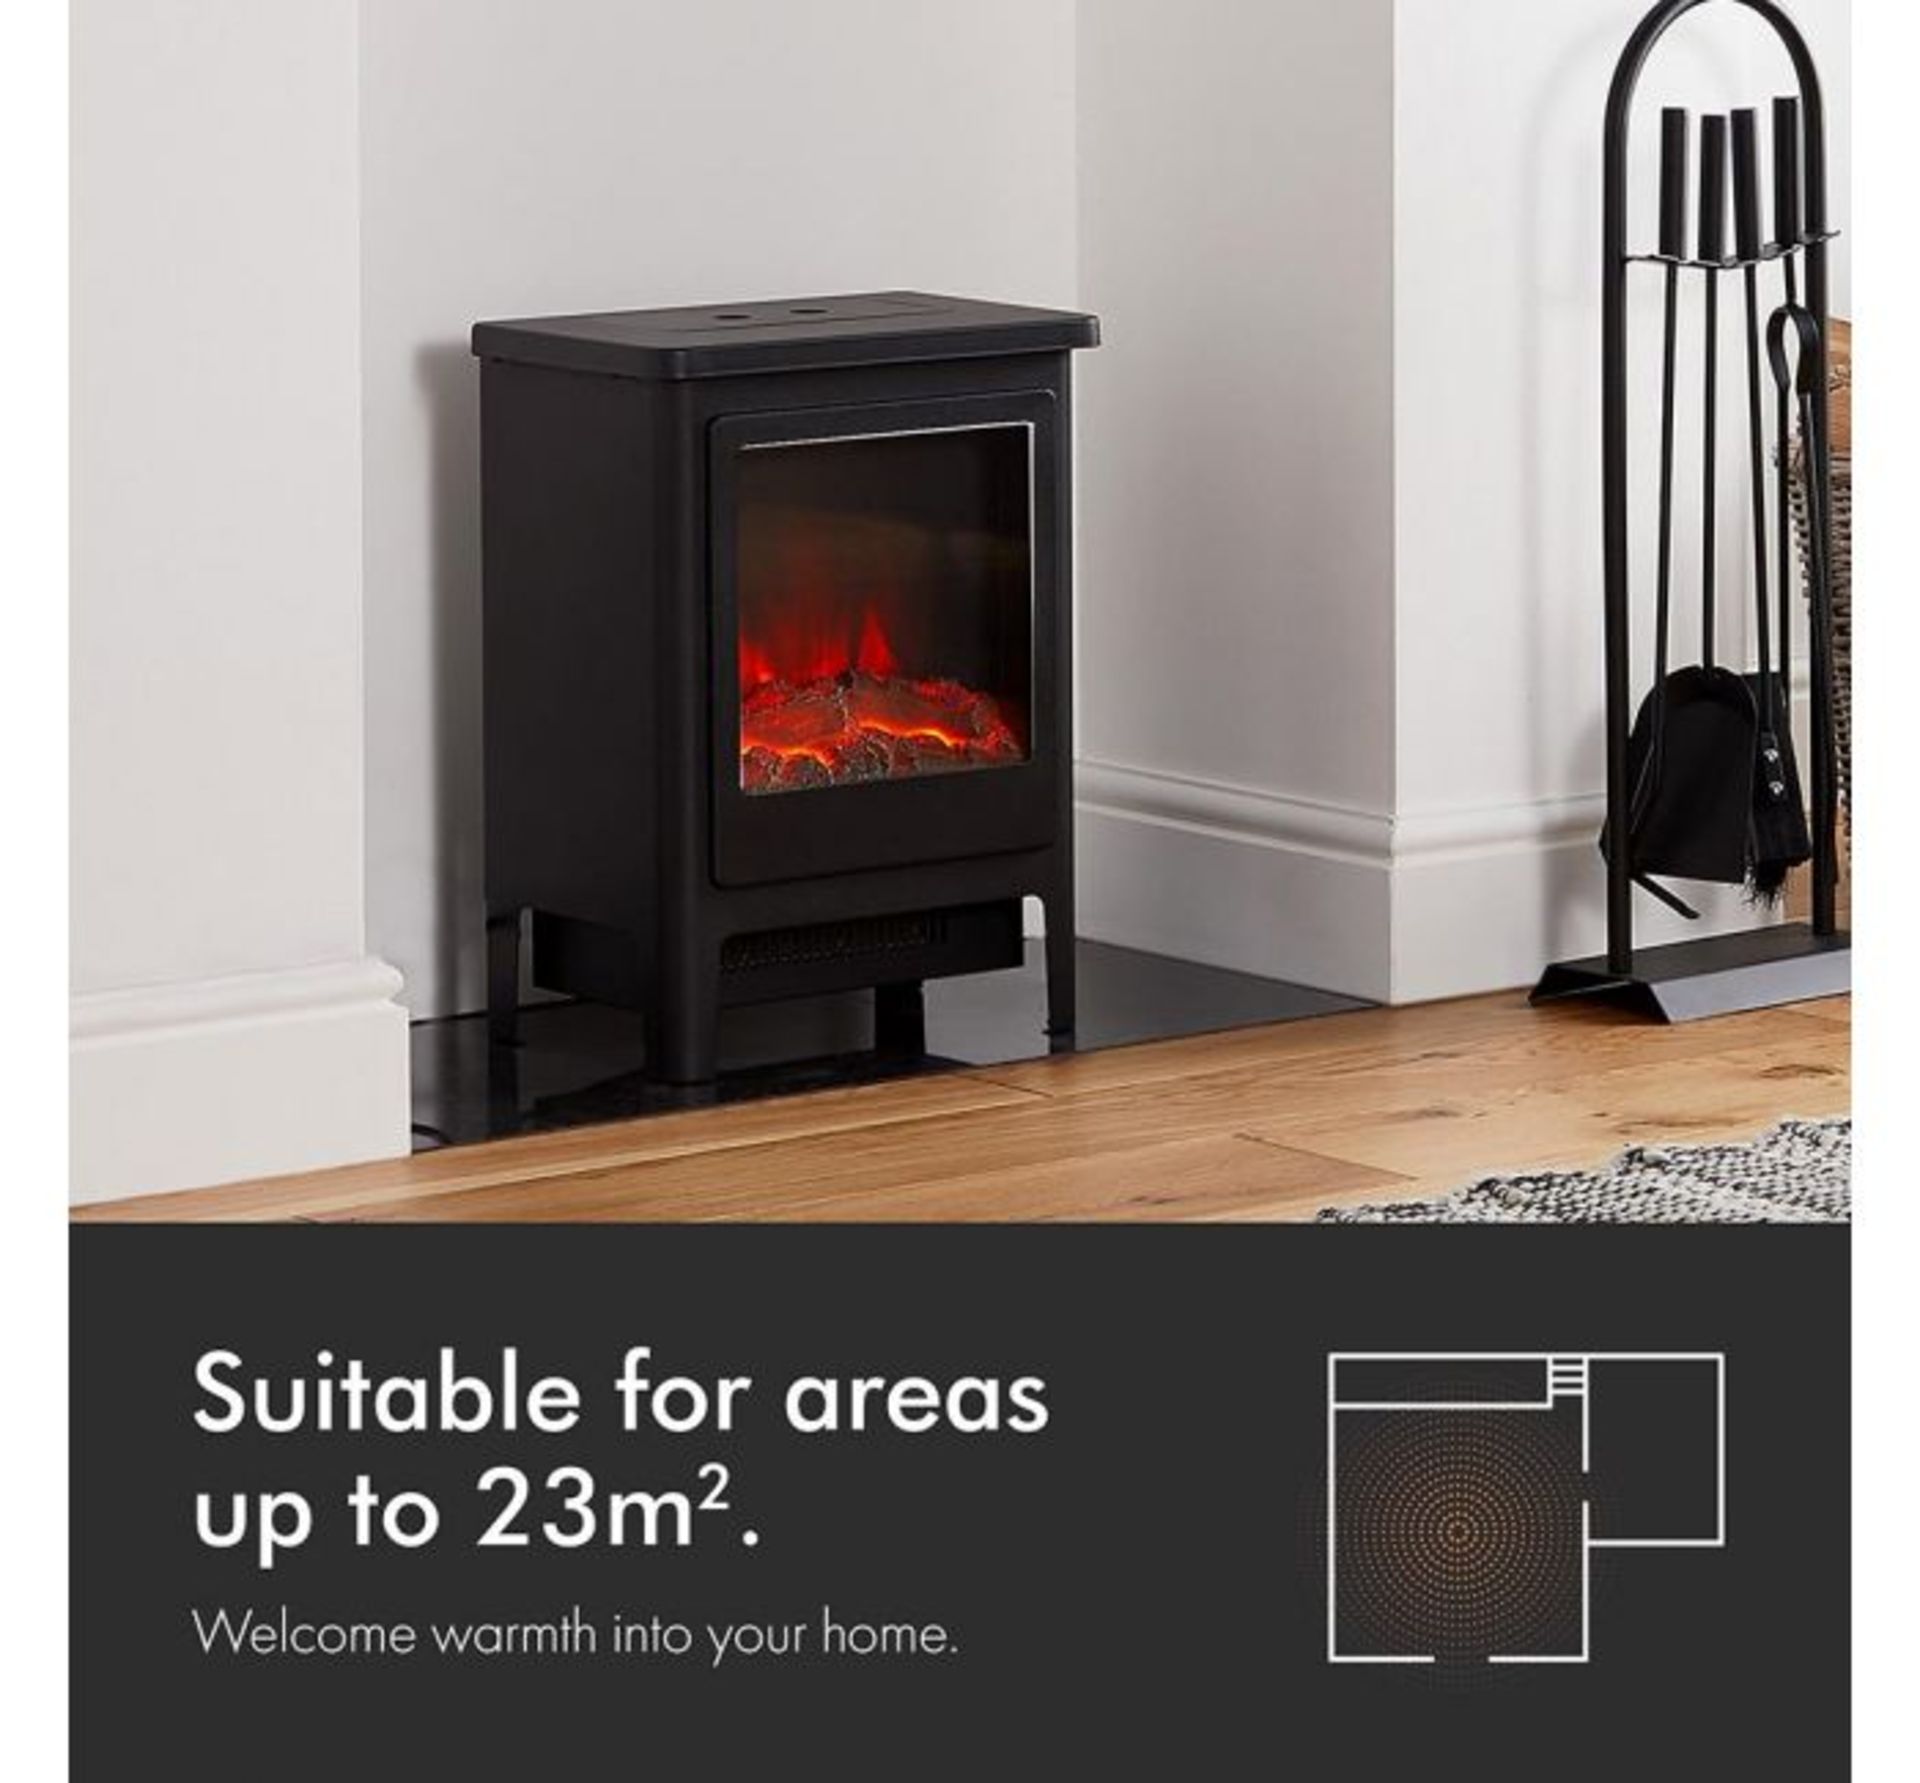 (K13) 1900W Contemporary Stove Heater The large window displays a realistic LED log fire Fea... - Image 3 of 3